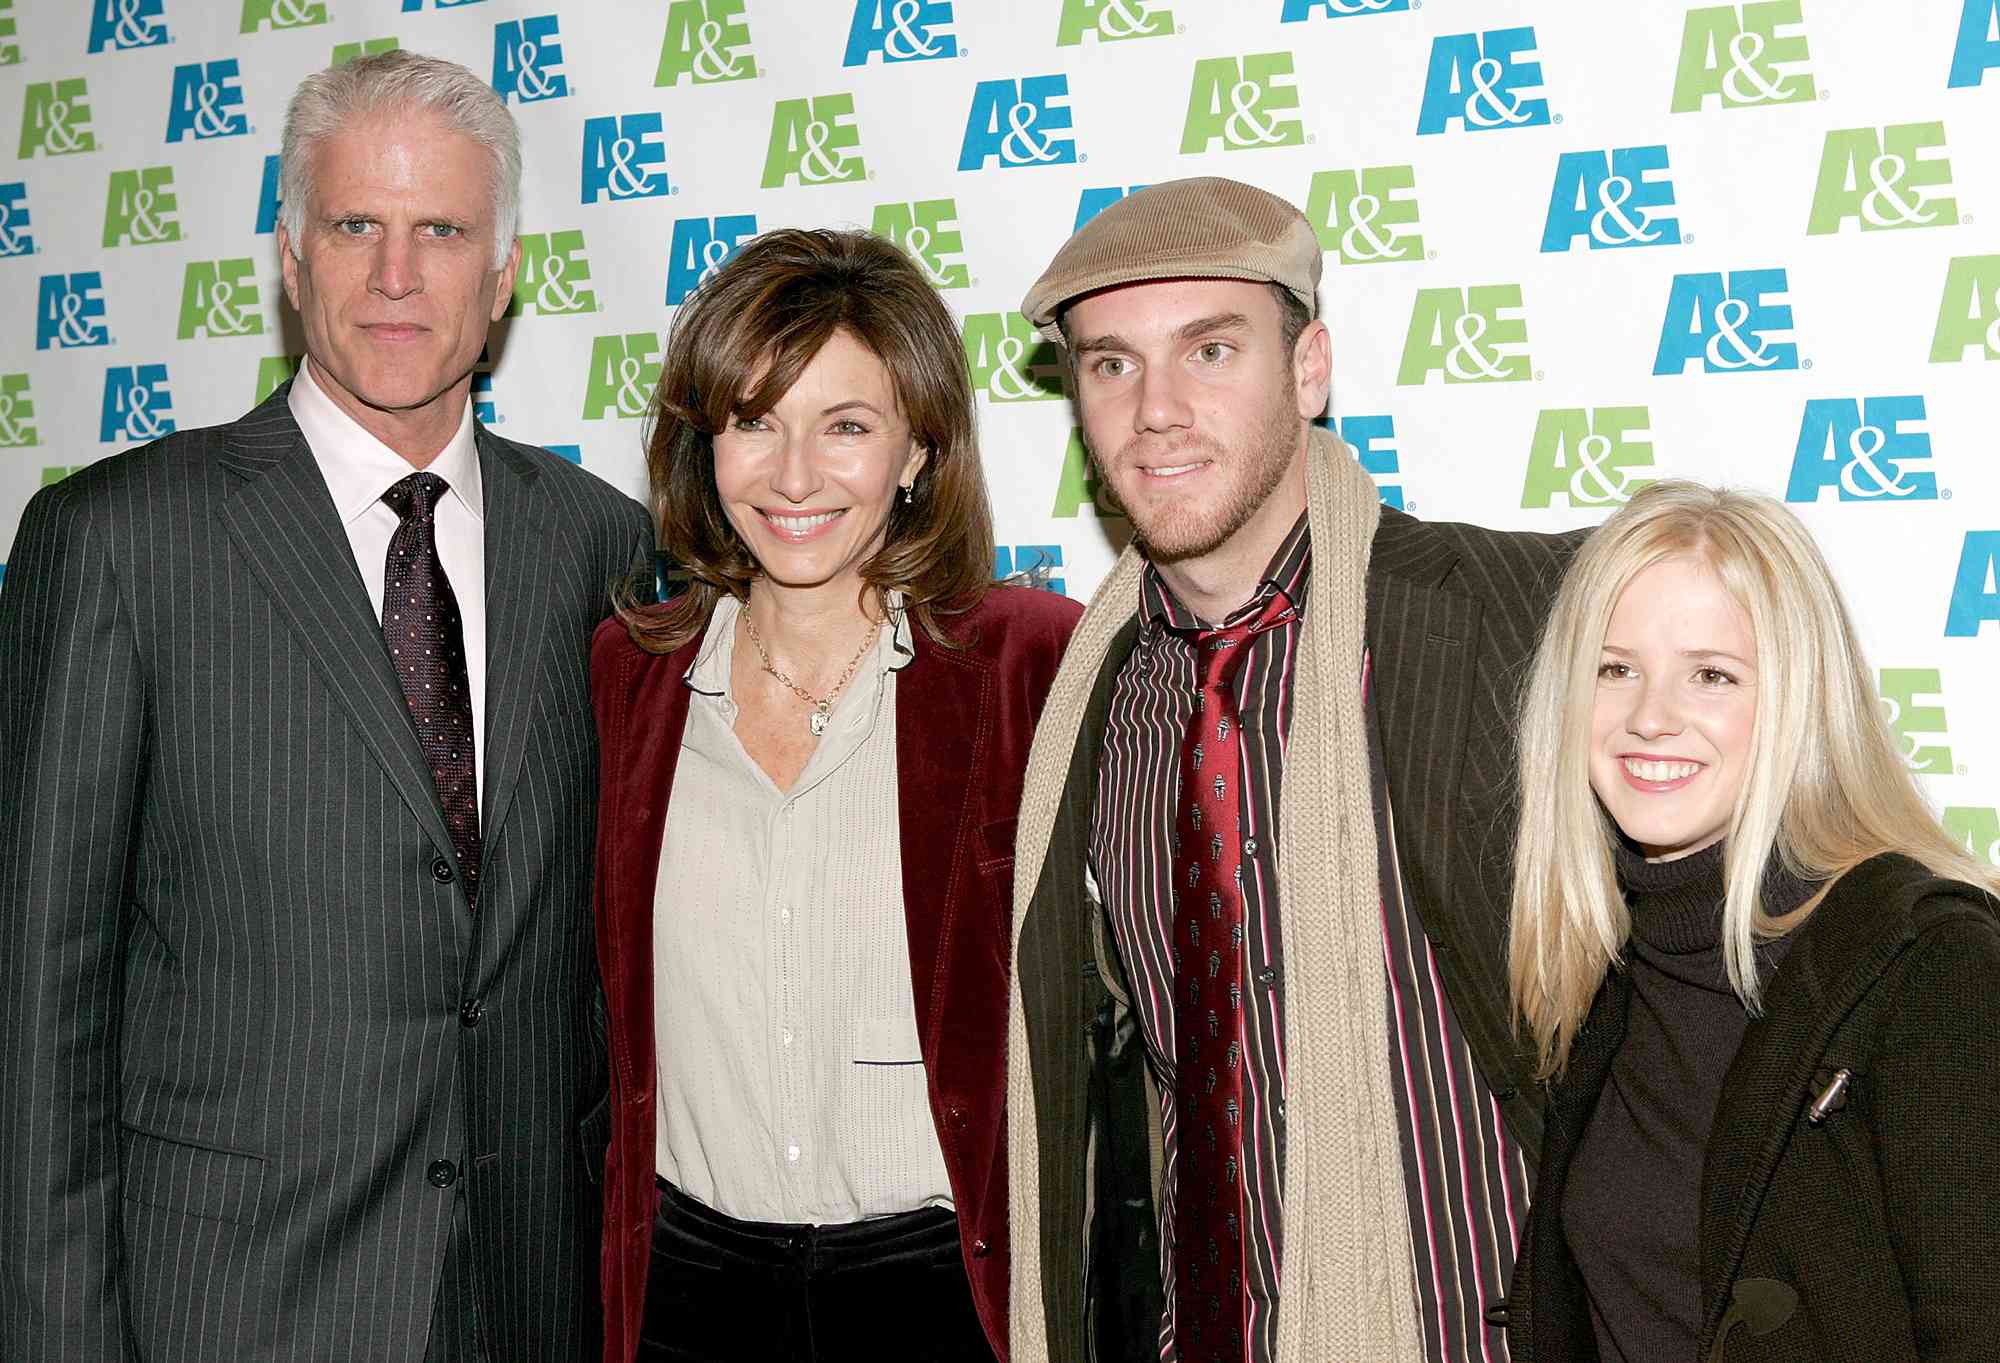 Actors Ted Dandon and Mary Steenburgen with their children Charlie McDowell and Kat Danson attend the screening of A&E Networks "Knights of the South Bronx" at the Fashion Institute of Technology, Katie Murphy Amphitheatre December 1, 2005 in New York City.